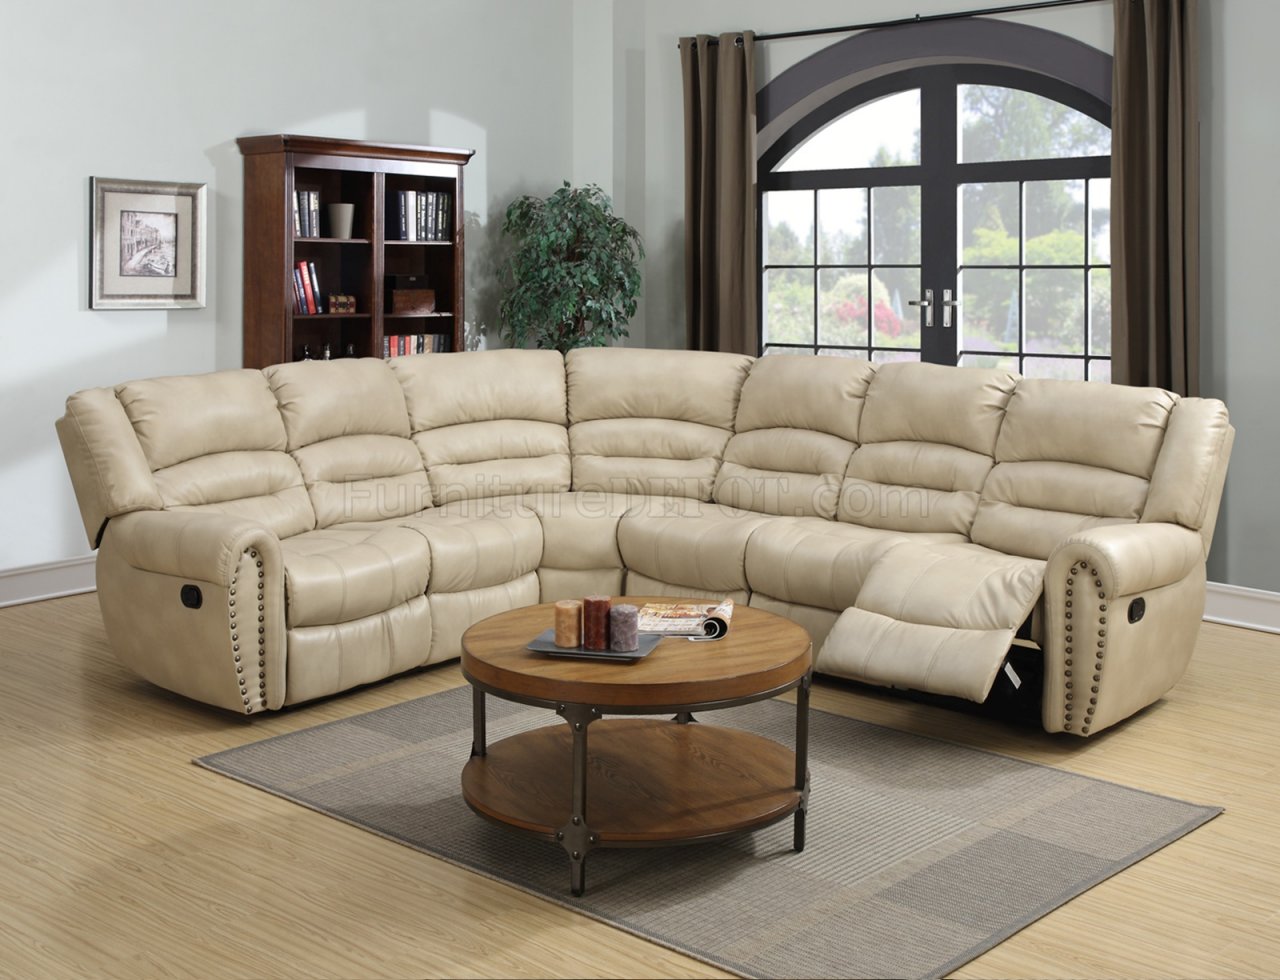 compact leather sectional sofa